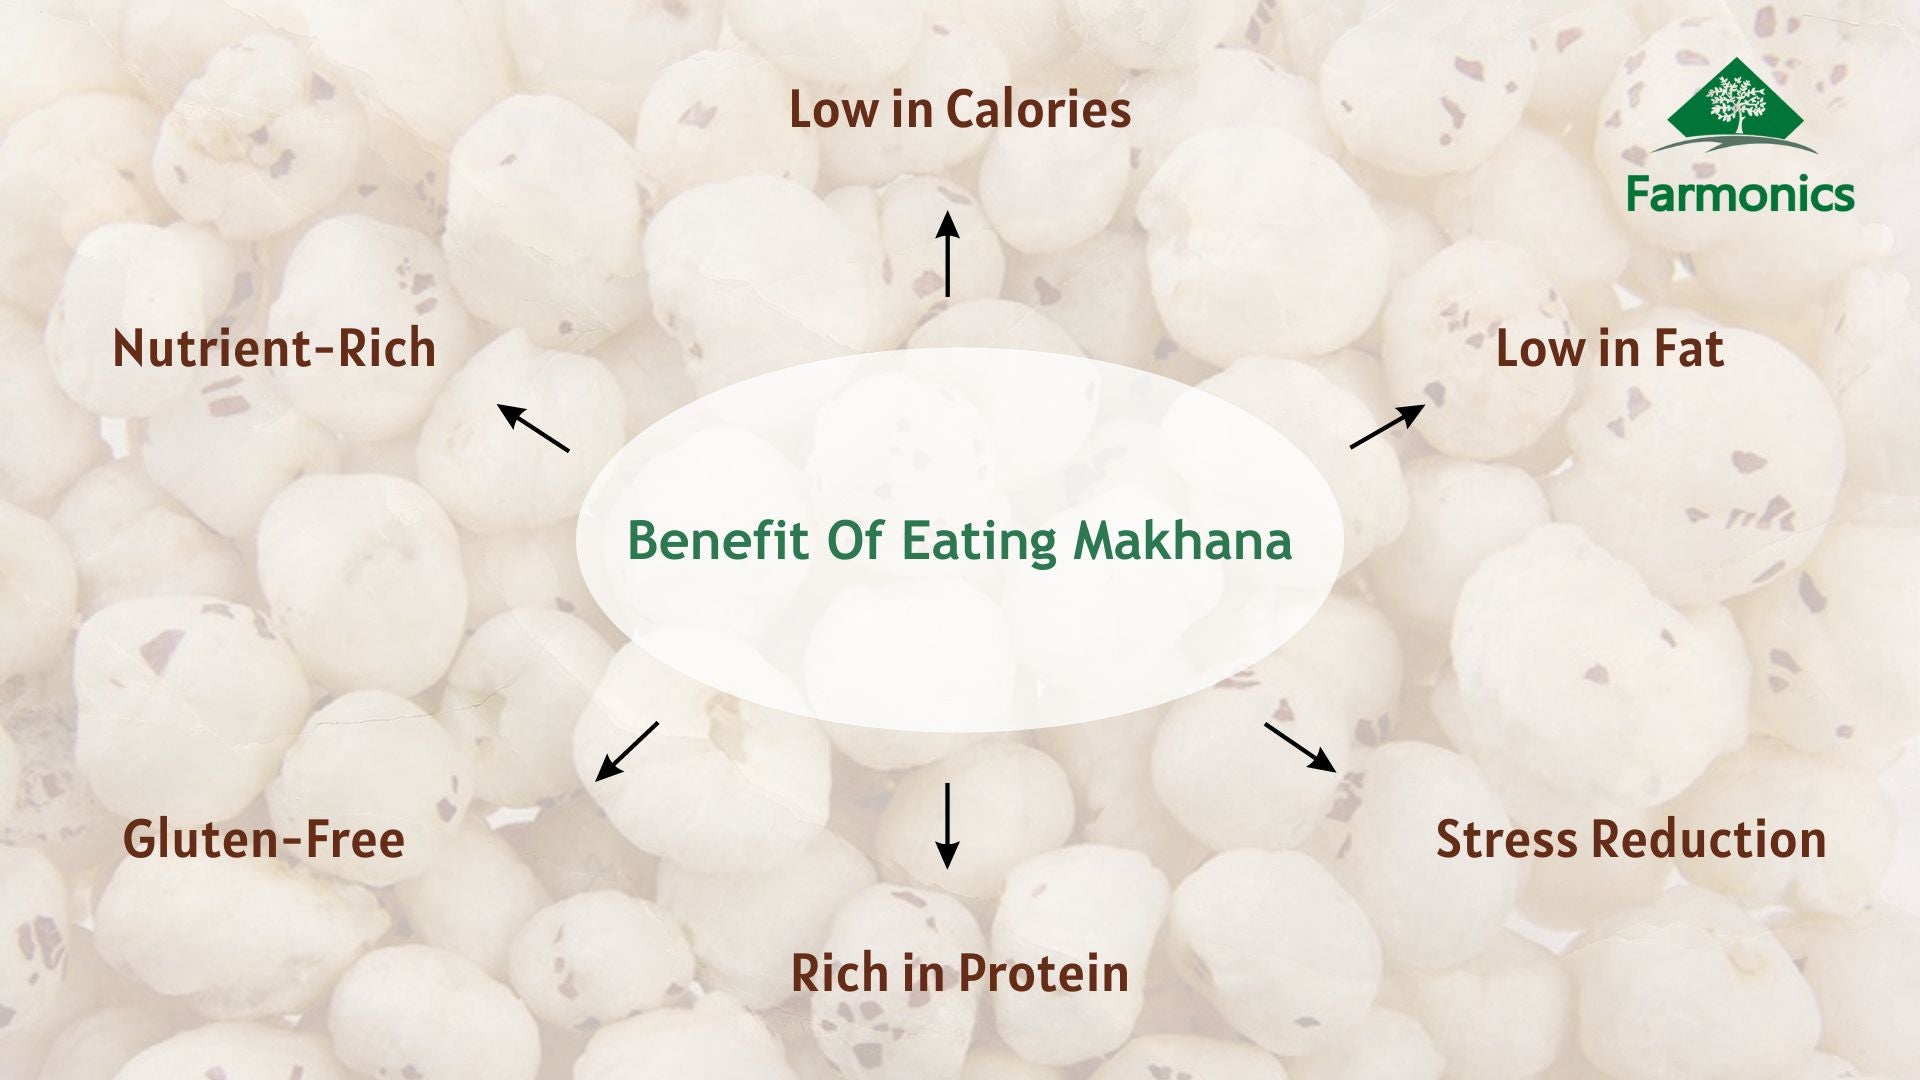 here are some of the benefits of Farmonics best quality makhana 